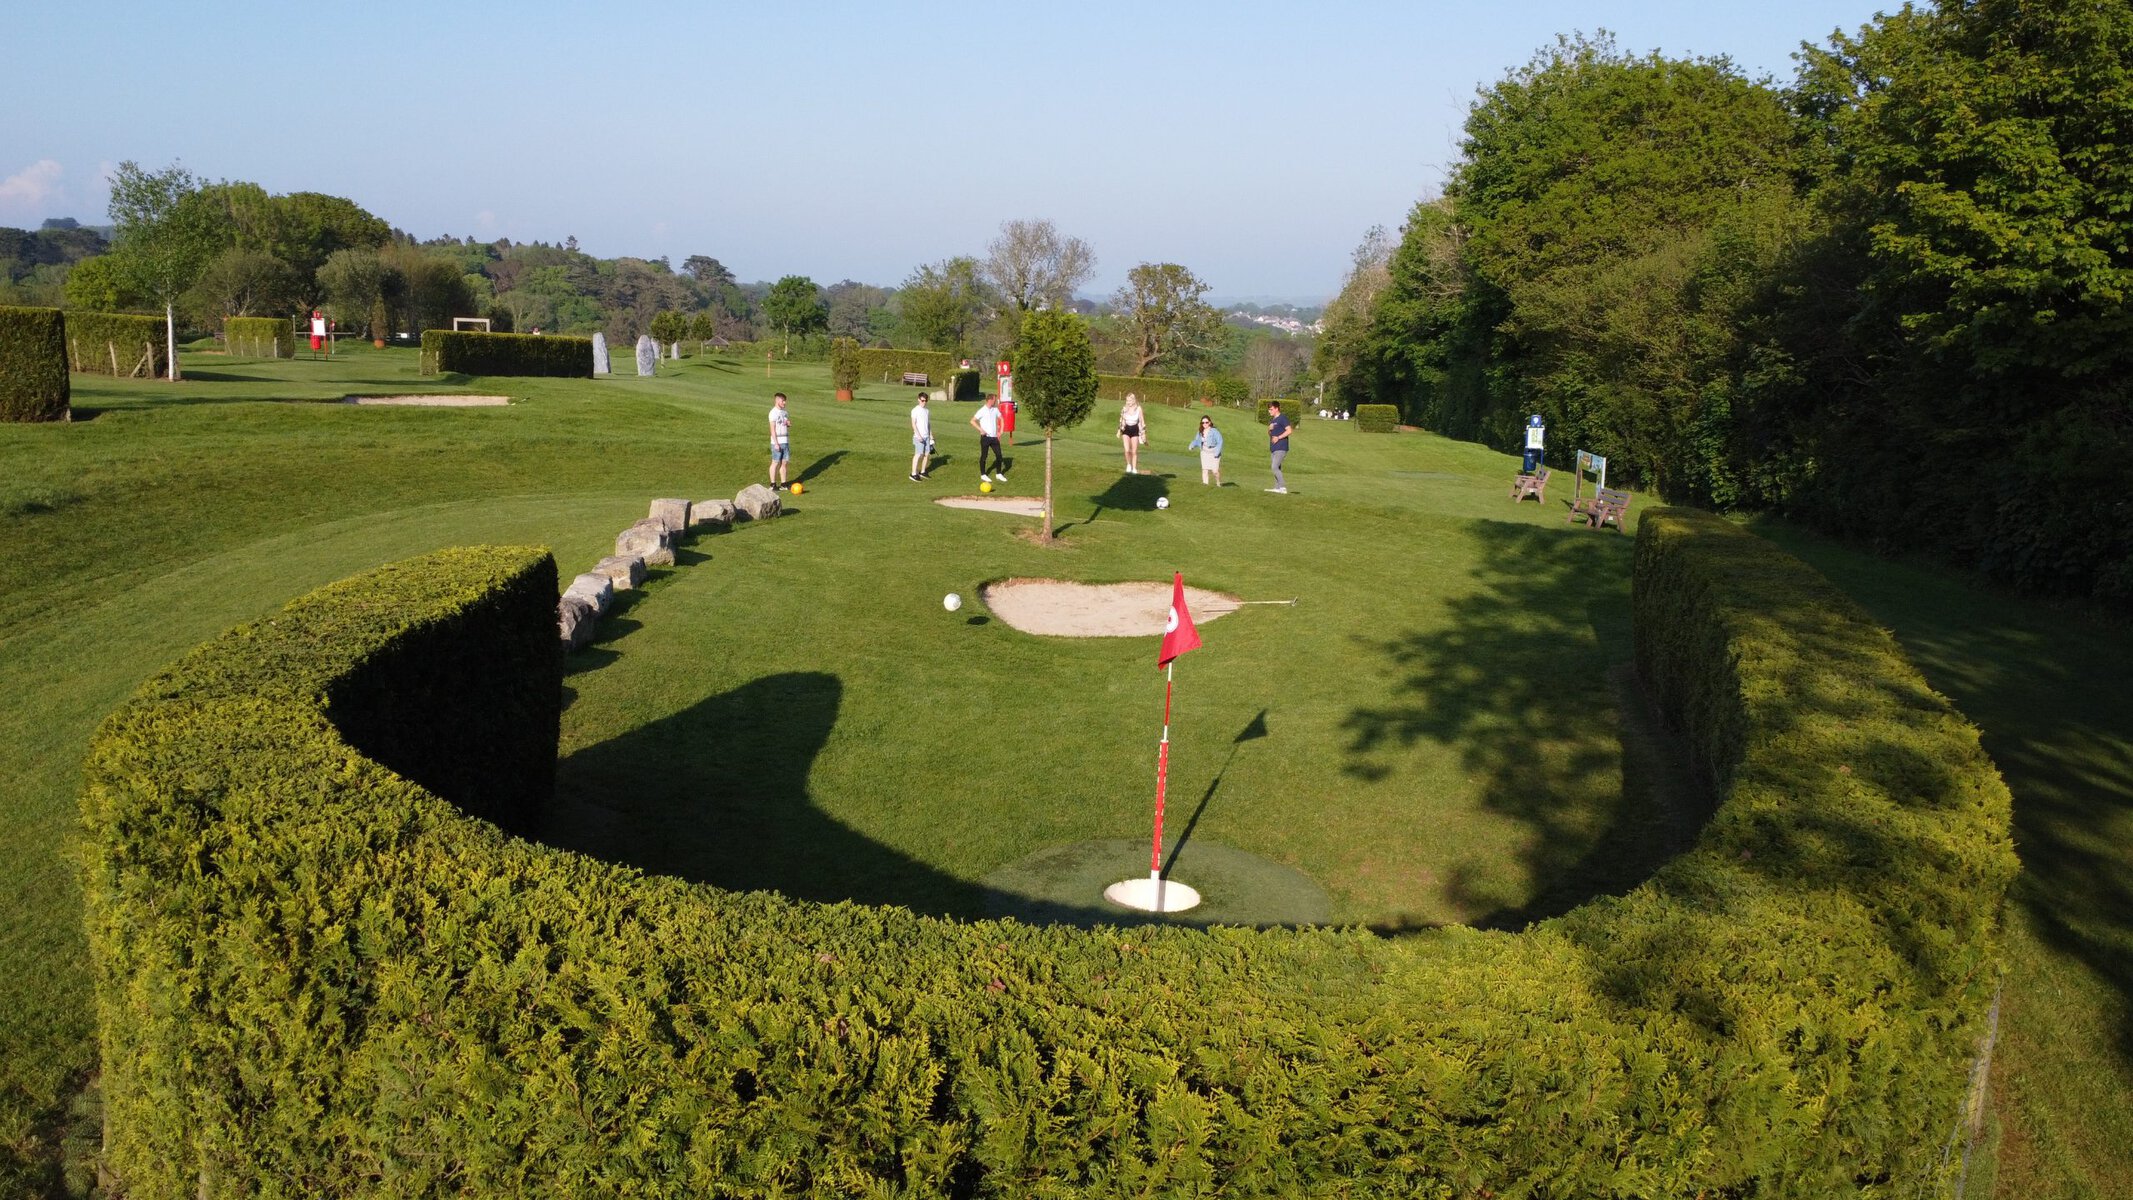 Things to do in Cornwall - Play FootballGolf on the parkland course at Cornwall Football Golf Park